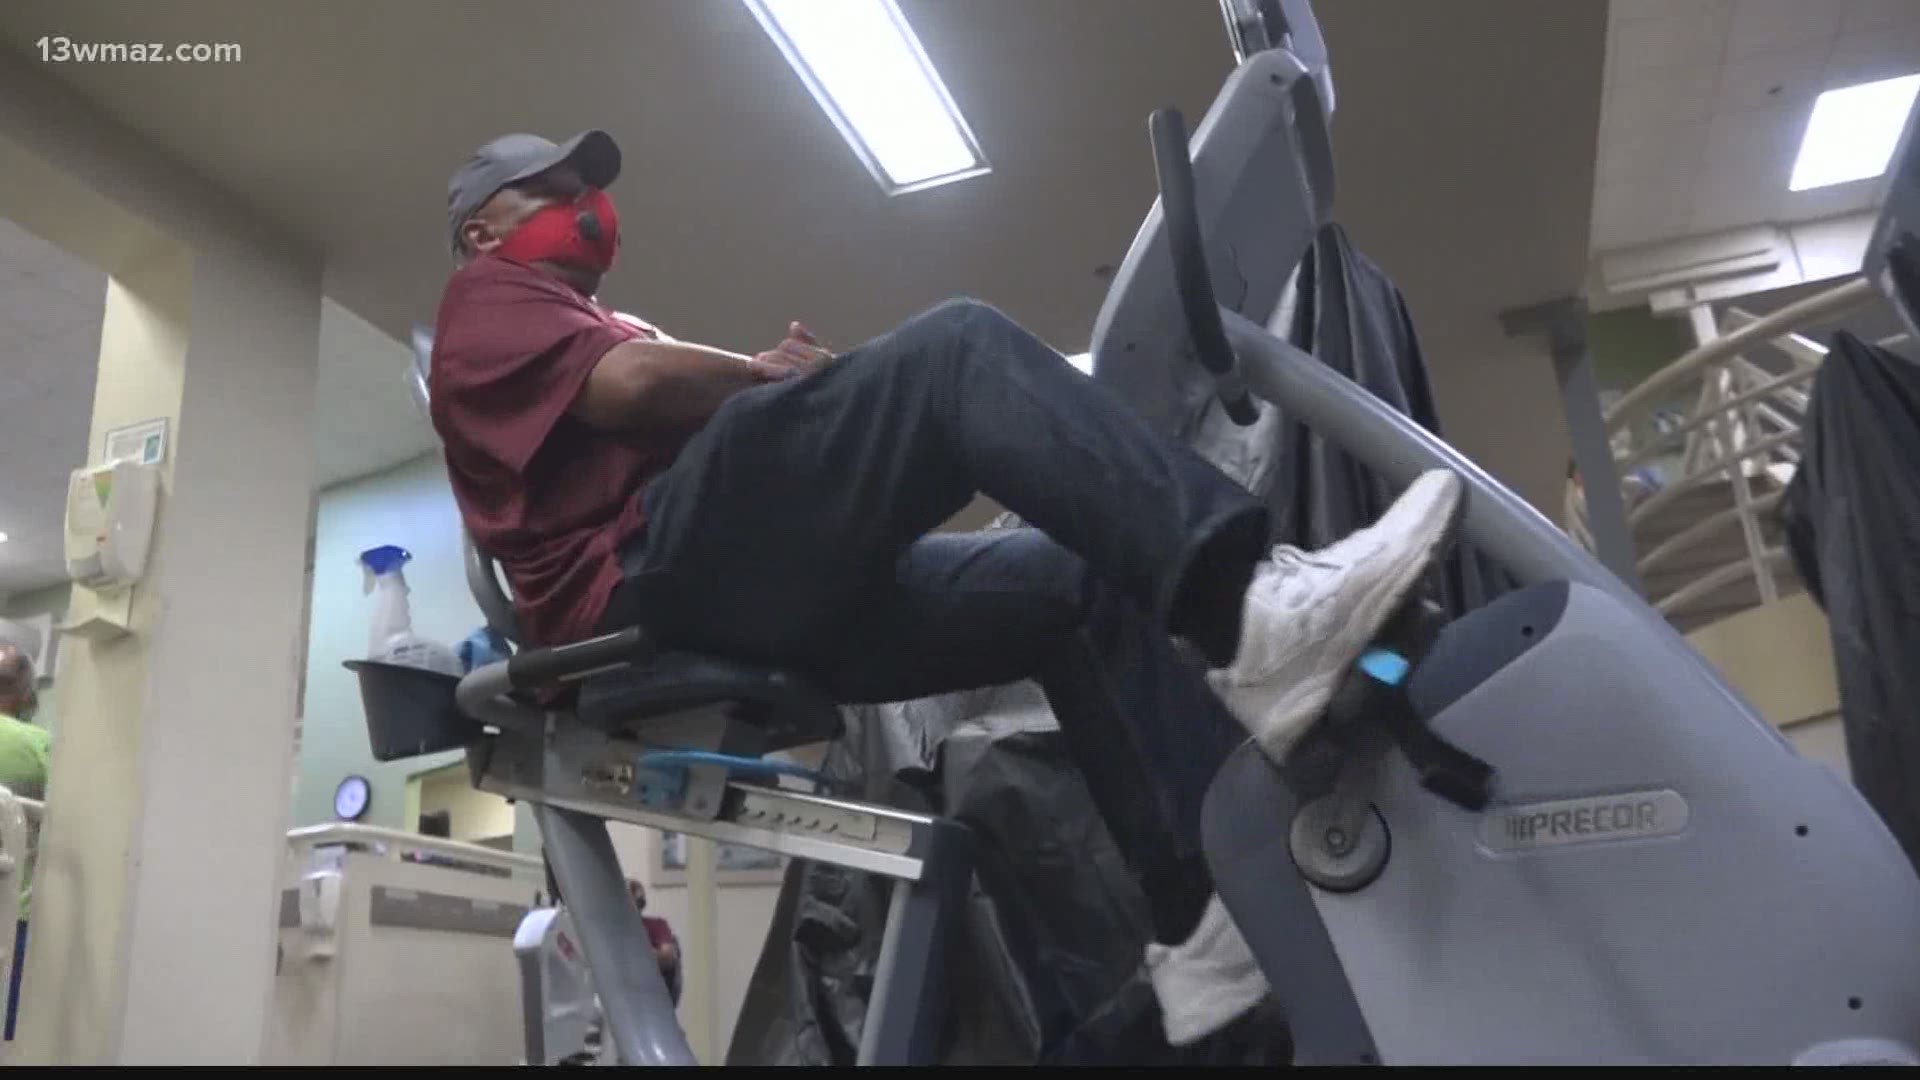 Gyms across the state have opened back up since June, but some have safety measures in place that could make your workout more difficult.